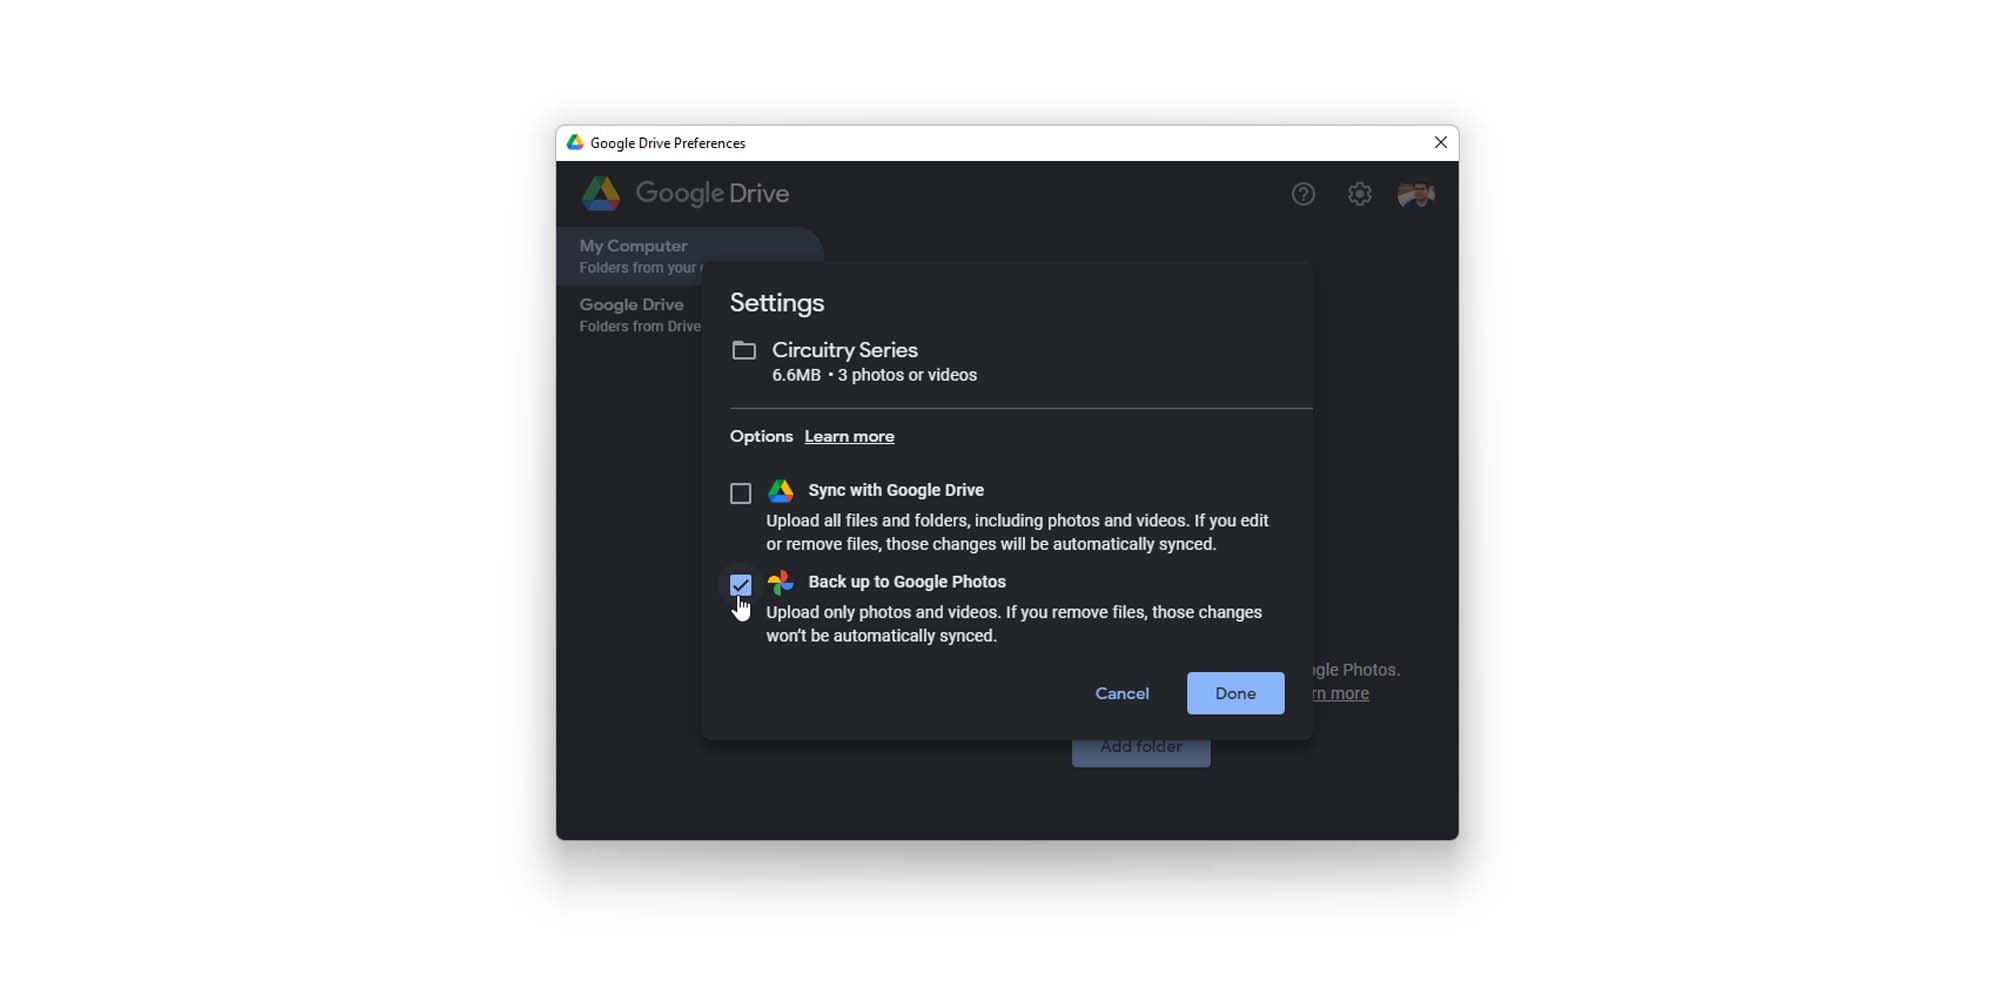 access google sync and backup on my desktop